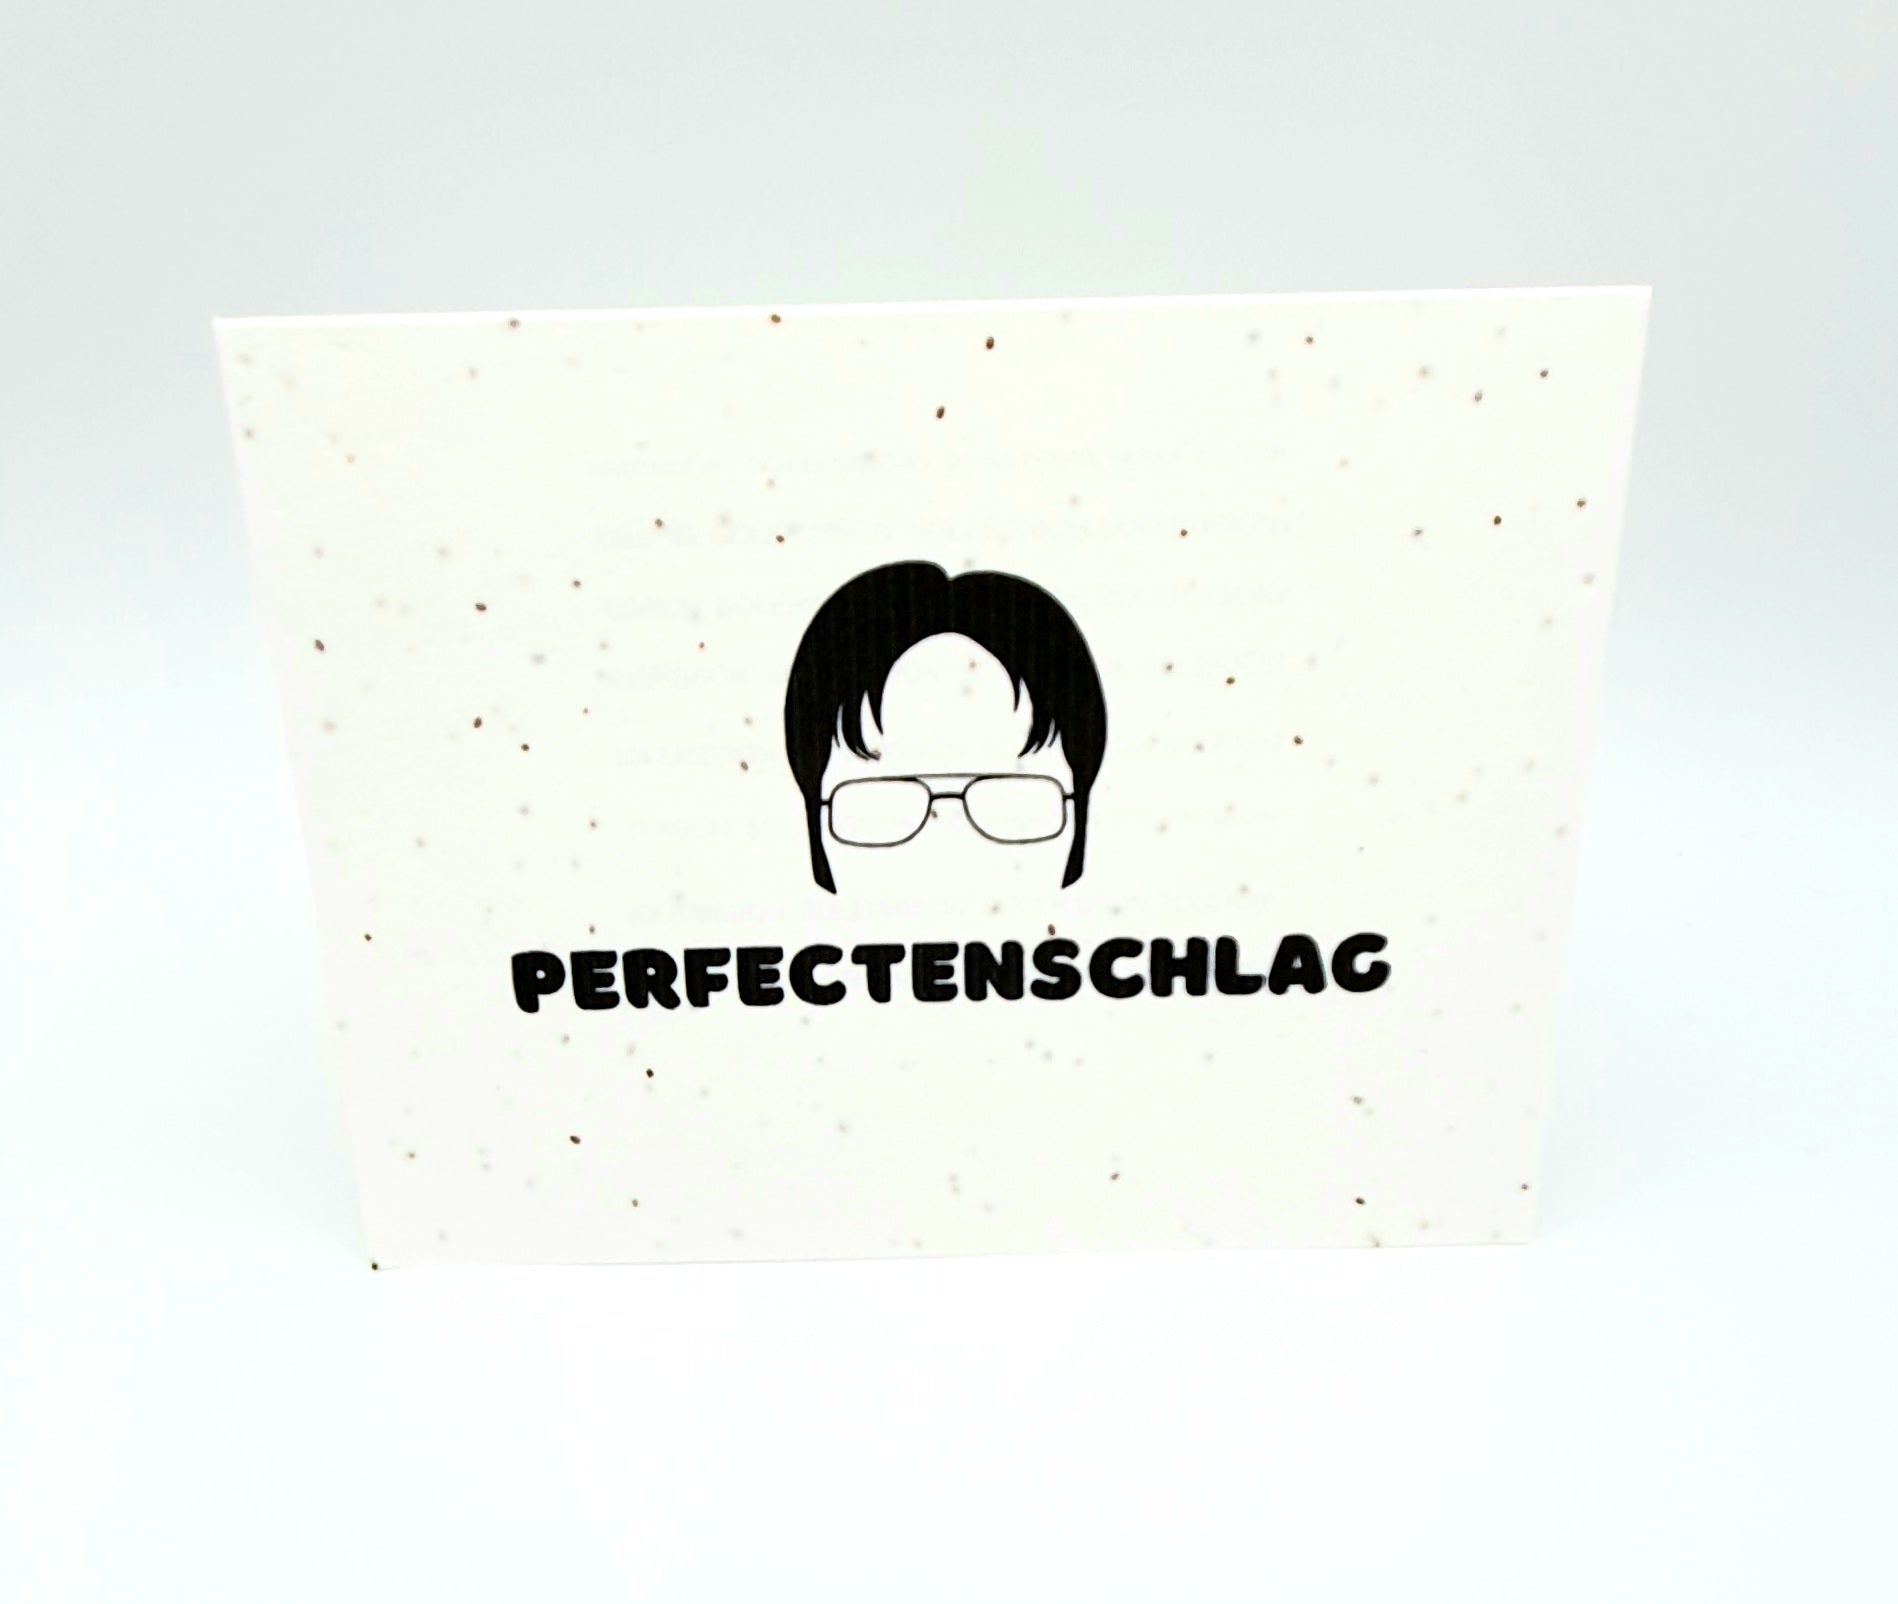 Plantable seed card with The Office Dwight Shrute "Perfectenschlag"